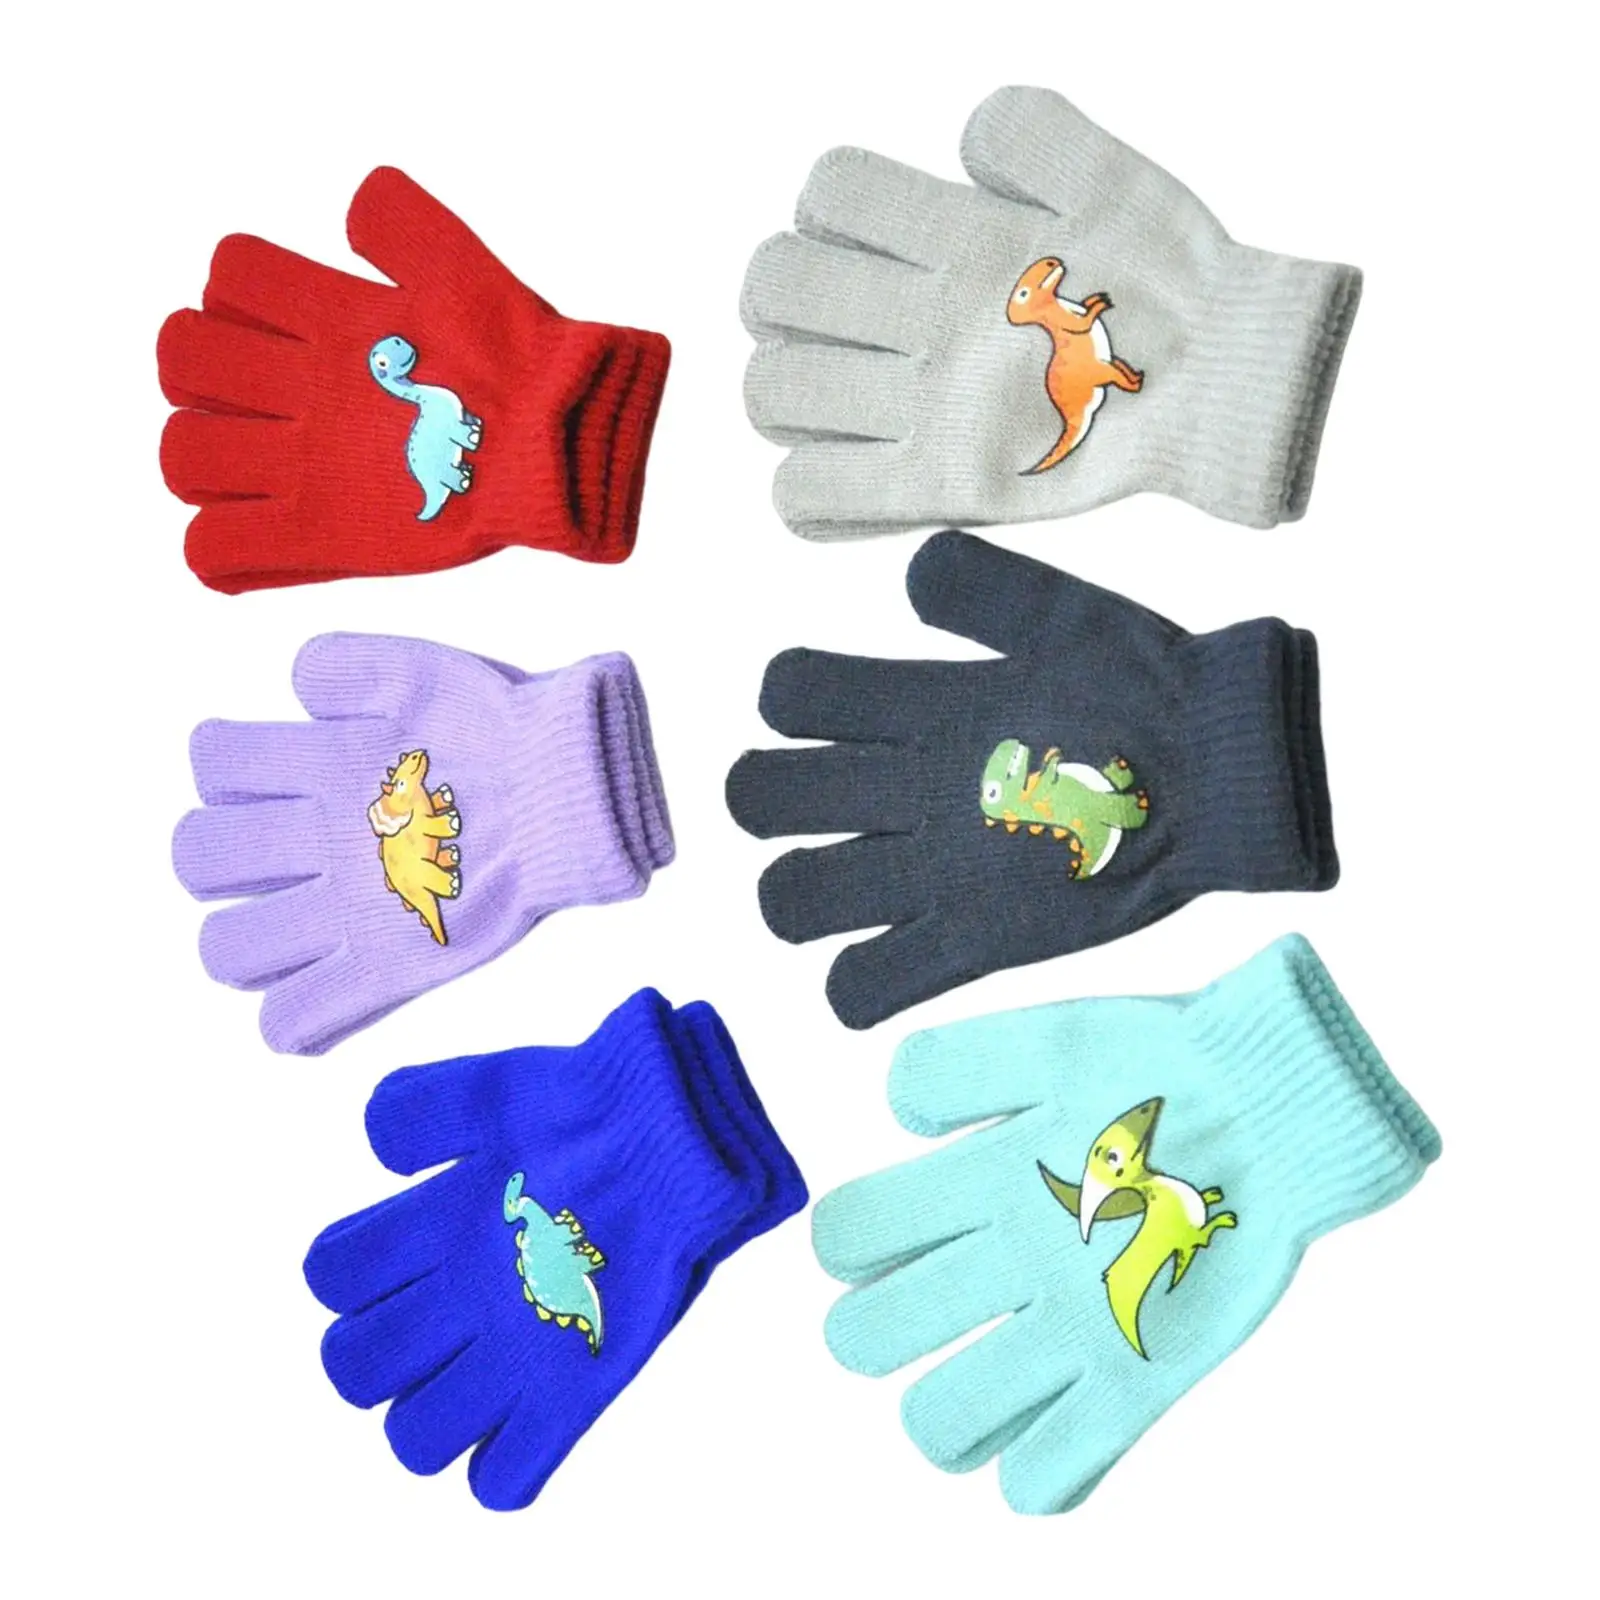 6 Pairs Kid Winter Gloves Stretchy Full Fingers Mitten Hand Warmer Thick Child Toddlers Cold Weather Outdoor Sports